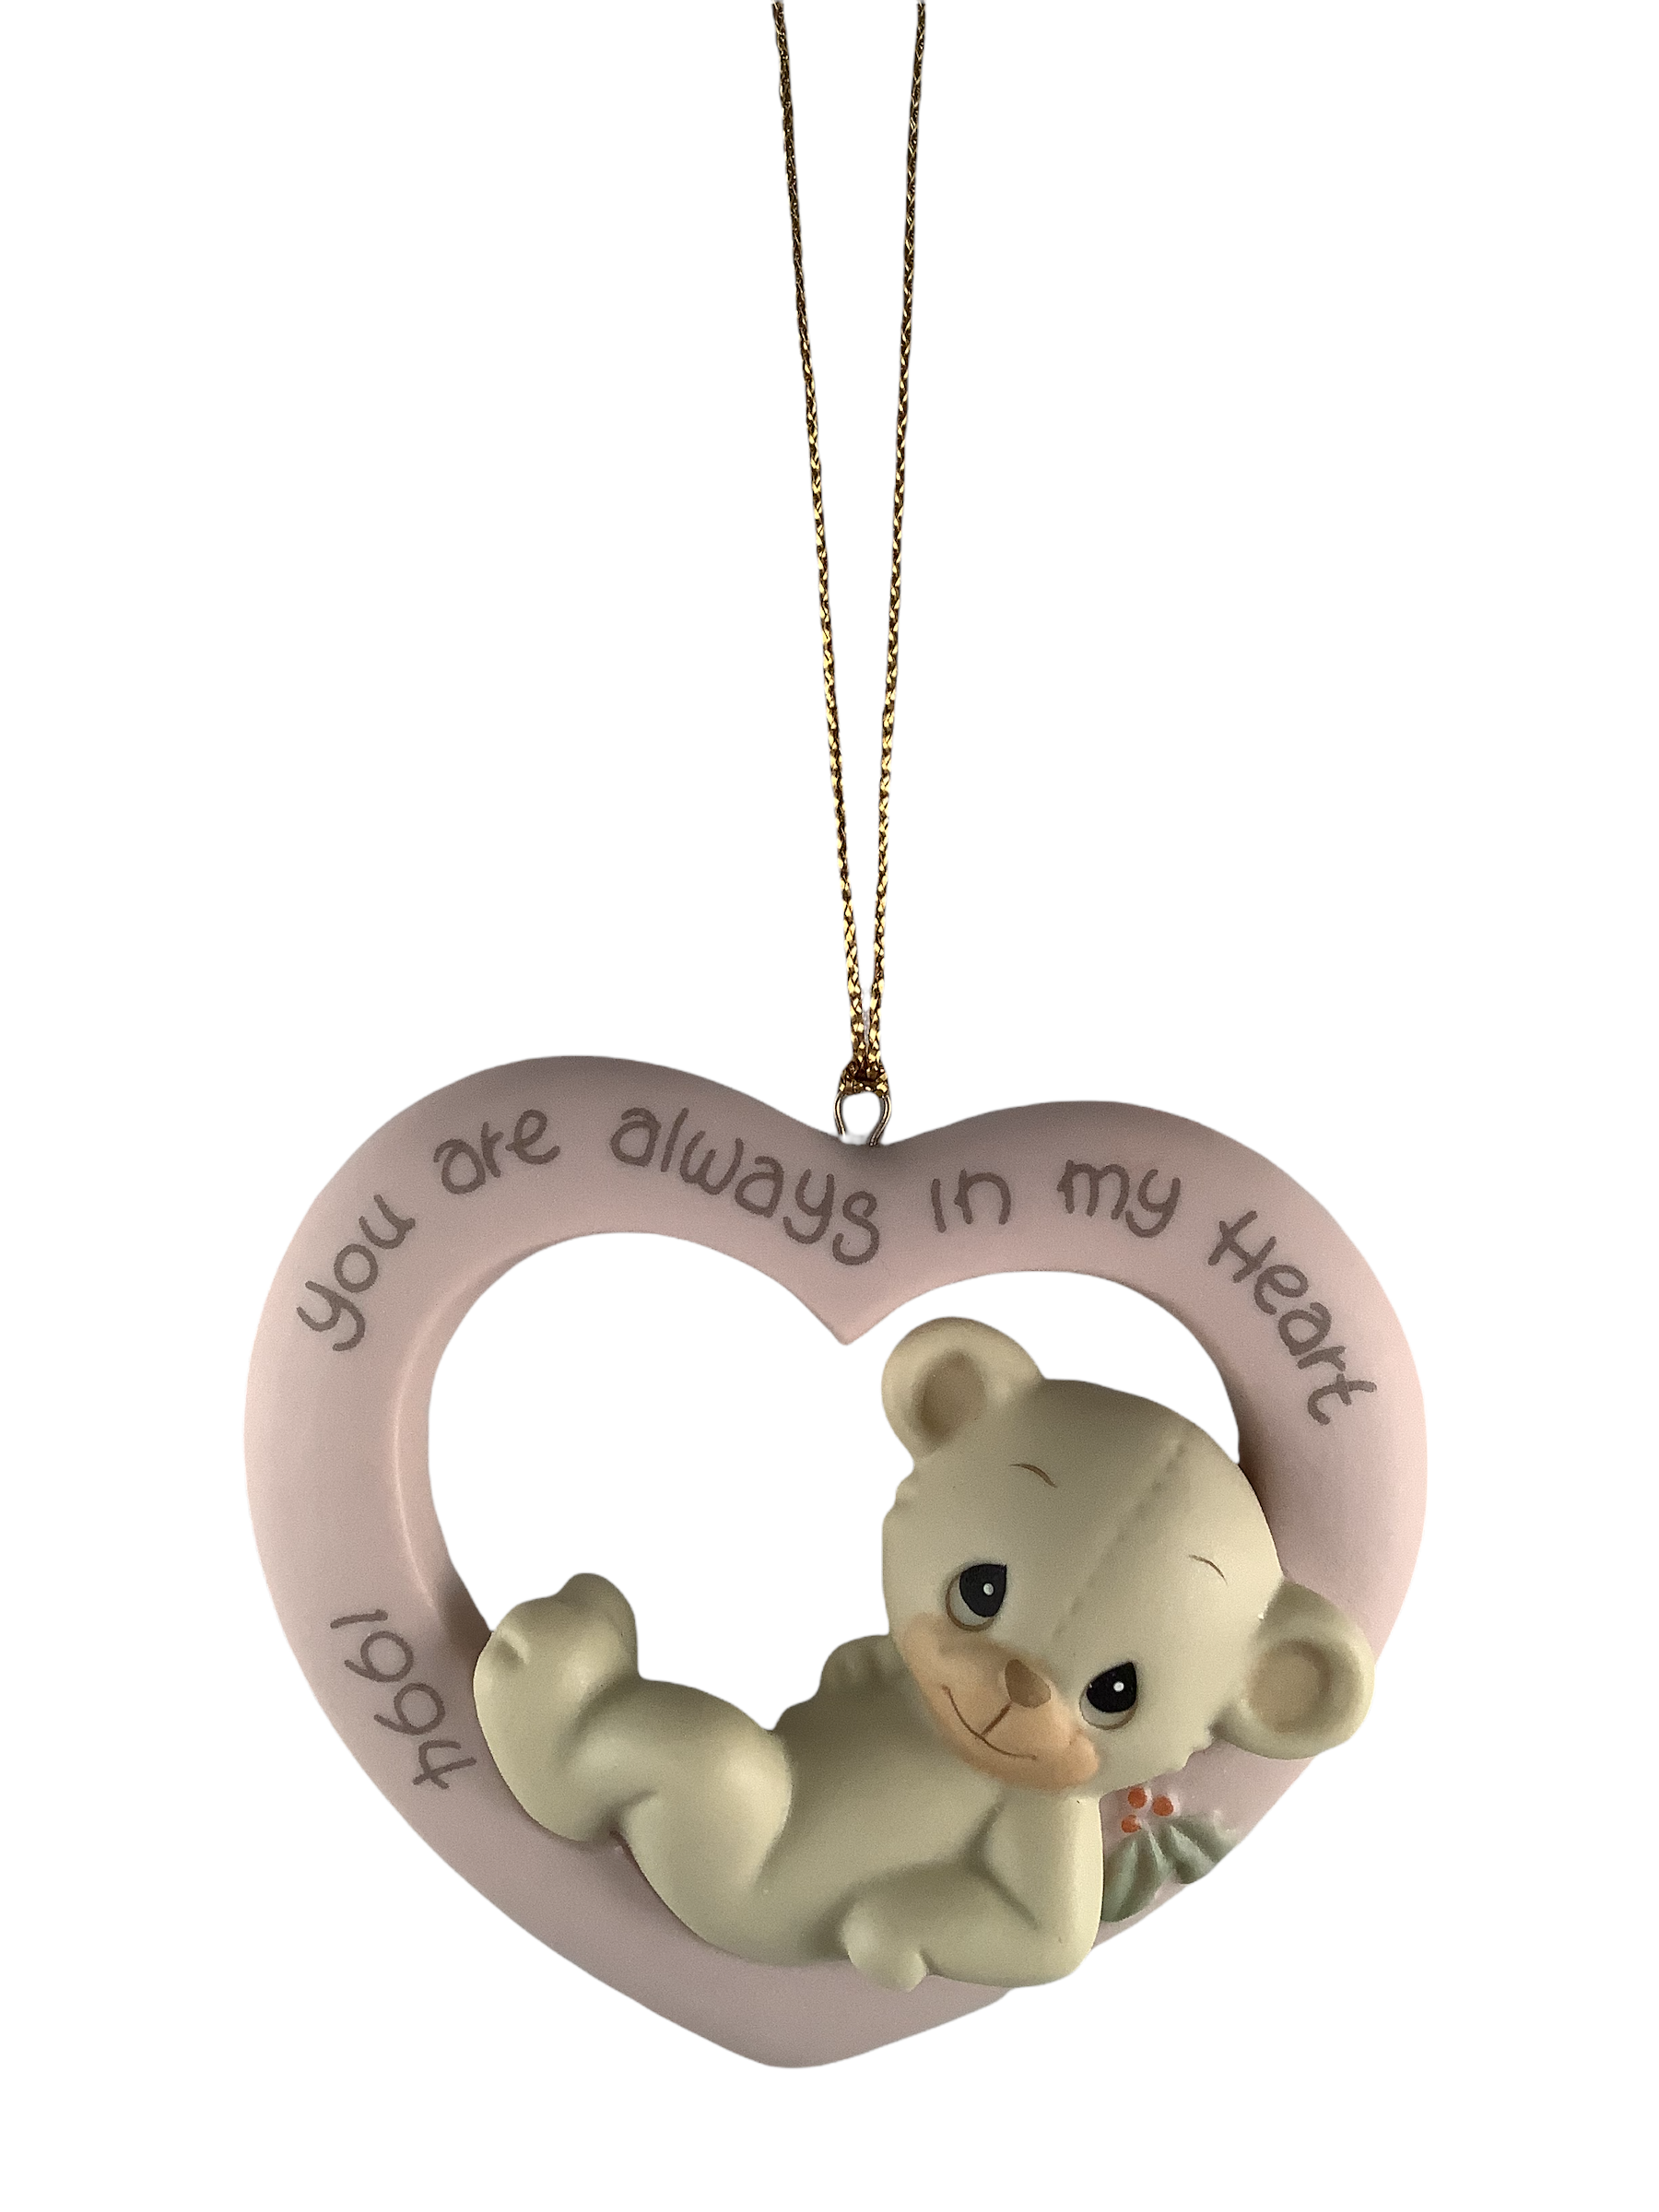 You Are Always In My Heart - Precious Moment Ornament